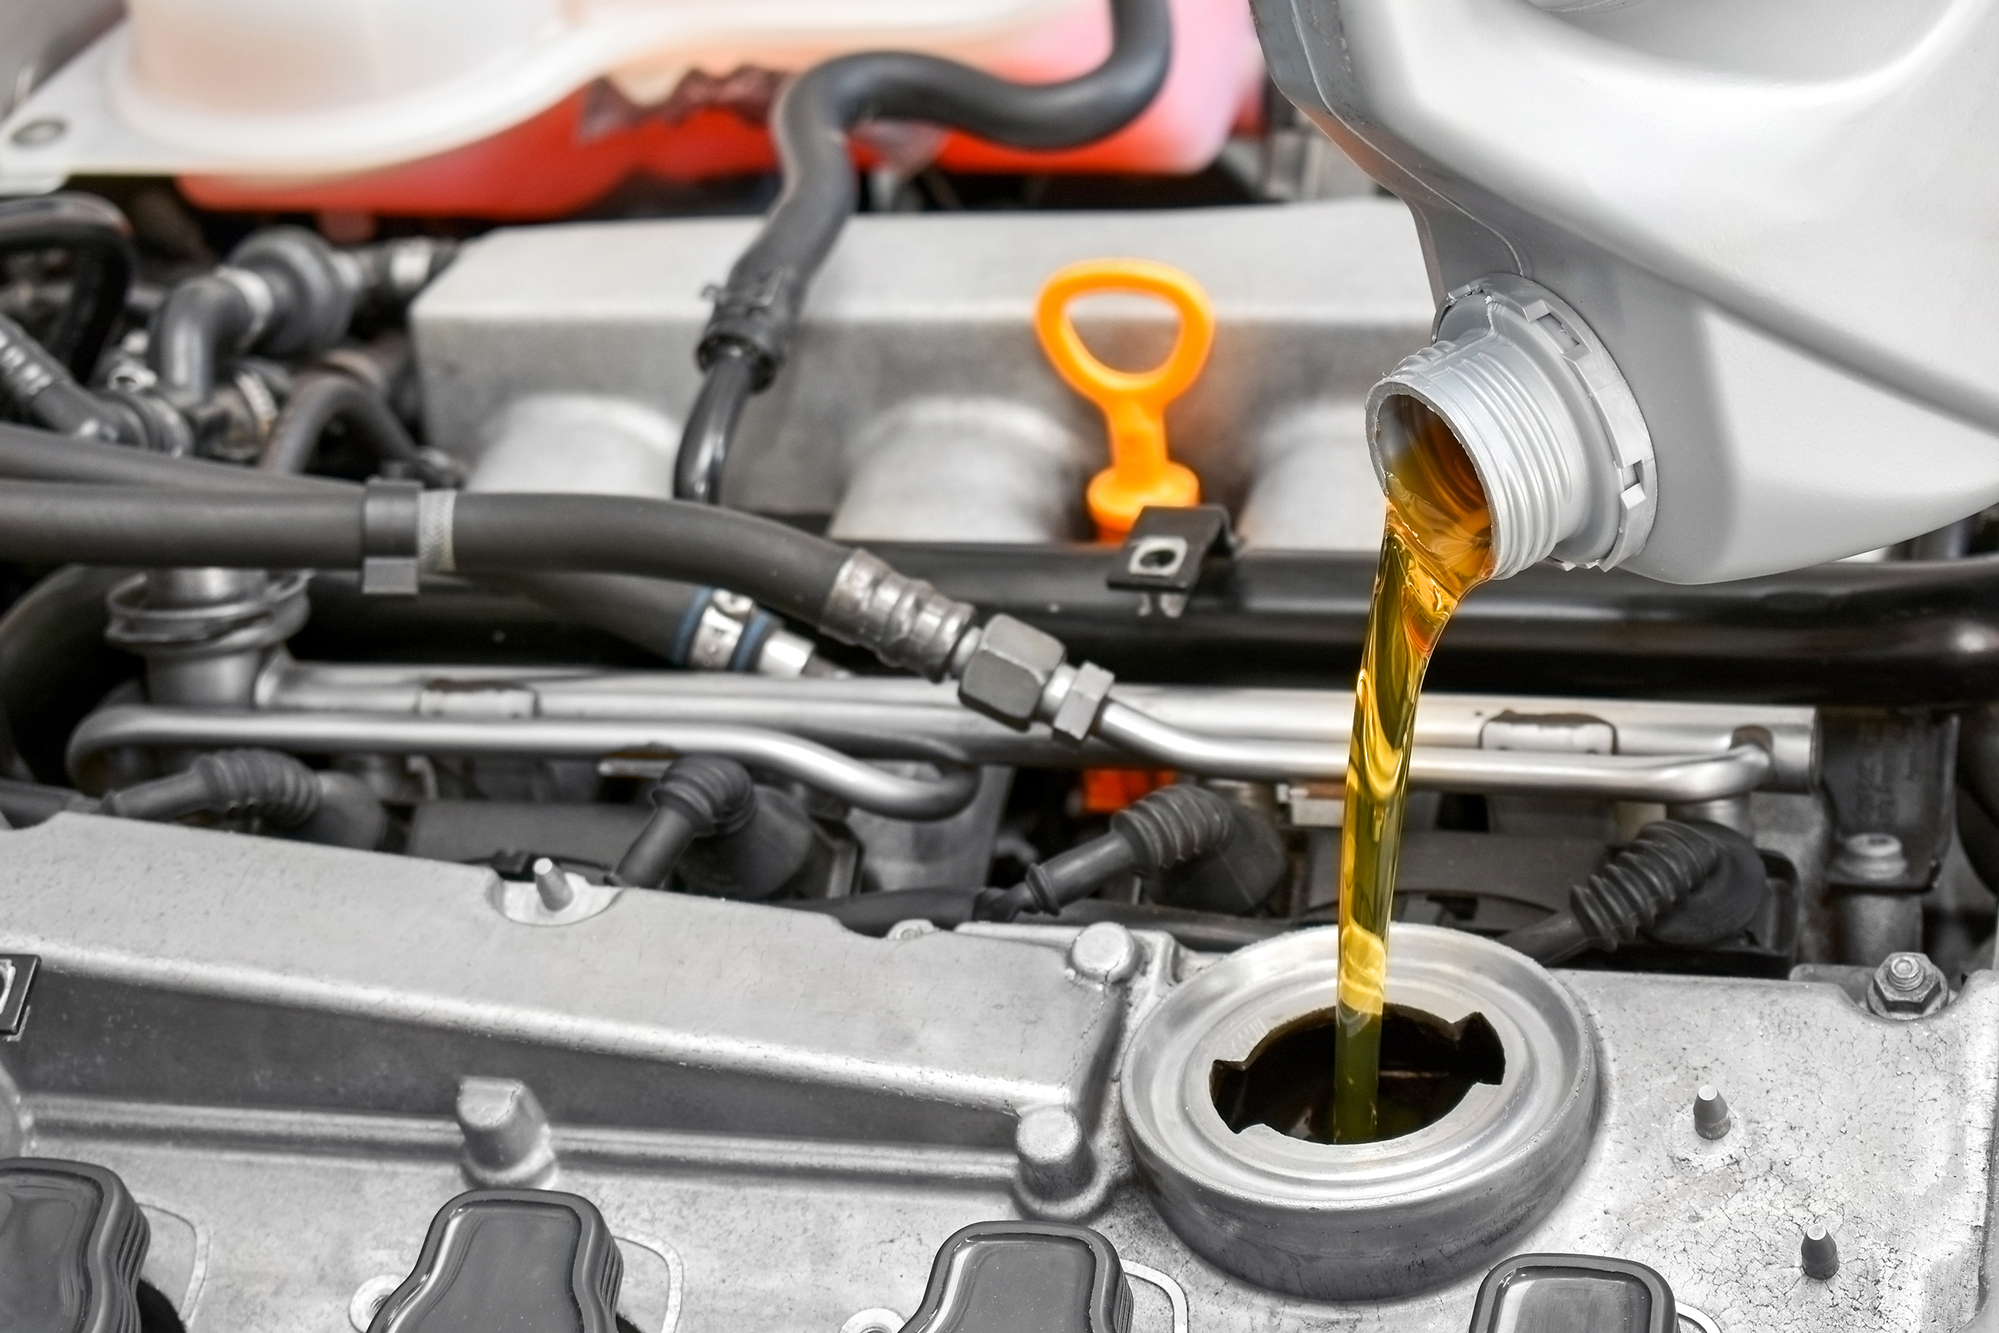 How To Fix The Metal Shavings In Oil Problem 5 Options My Car Makes